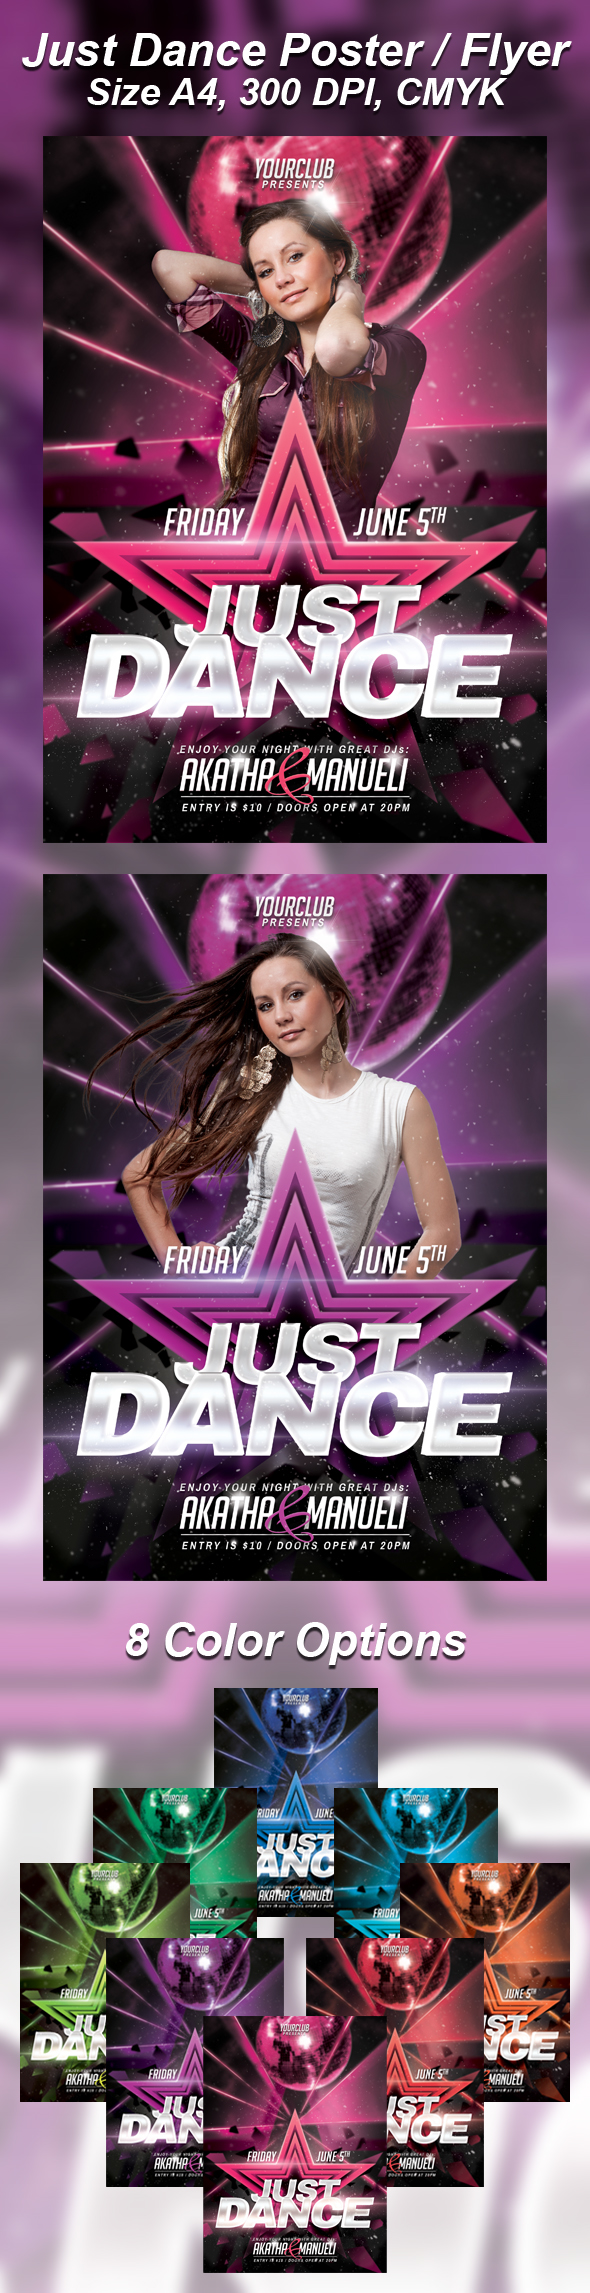 advertise club just dance disco Event flyer poster fully layered modern pink party presentation print Promotion template